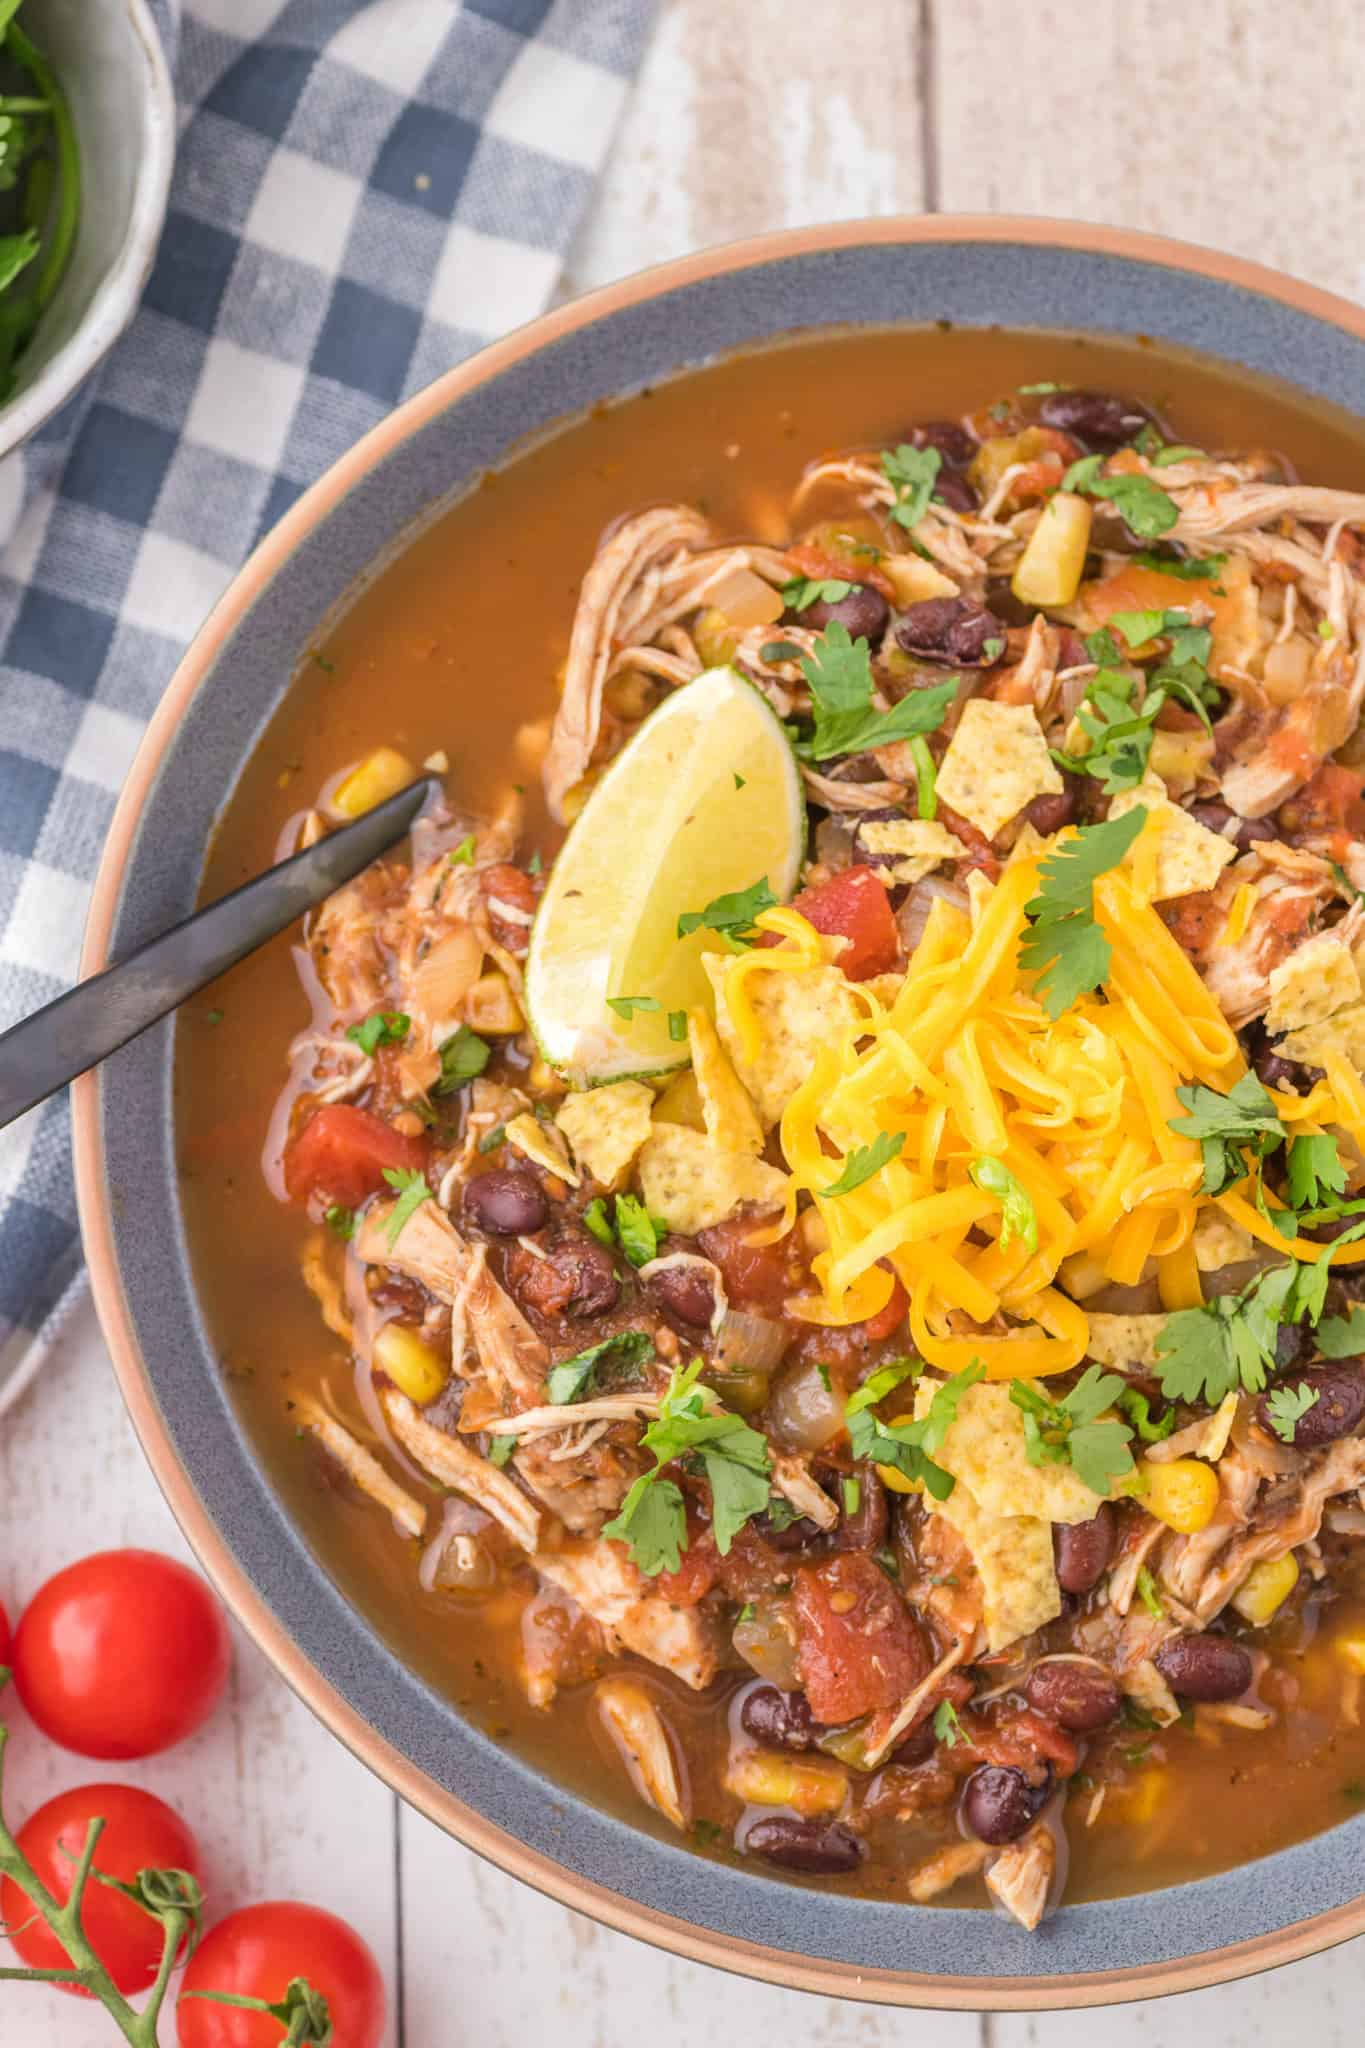 Chicken Taco Soup is a hearty soup recipe loaded with shredded chicken, black beans, corn, tomatoes and spices.